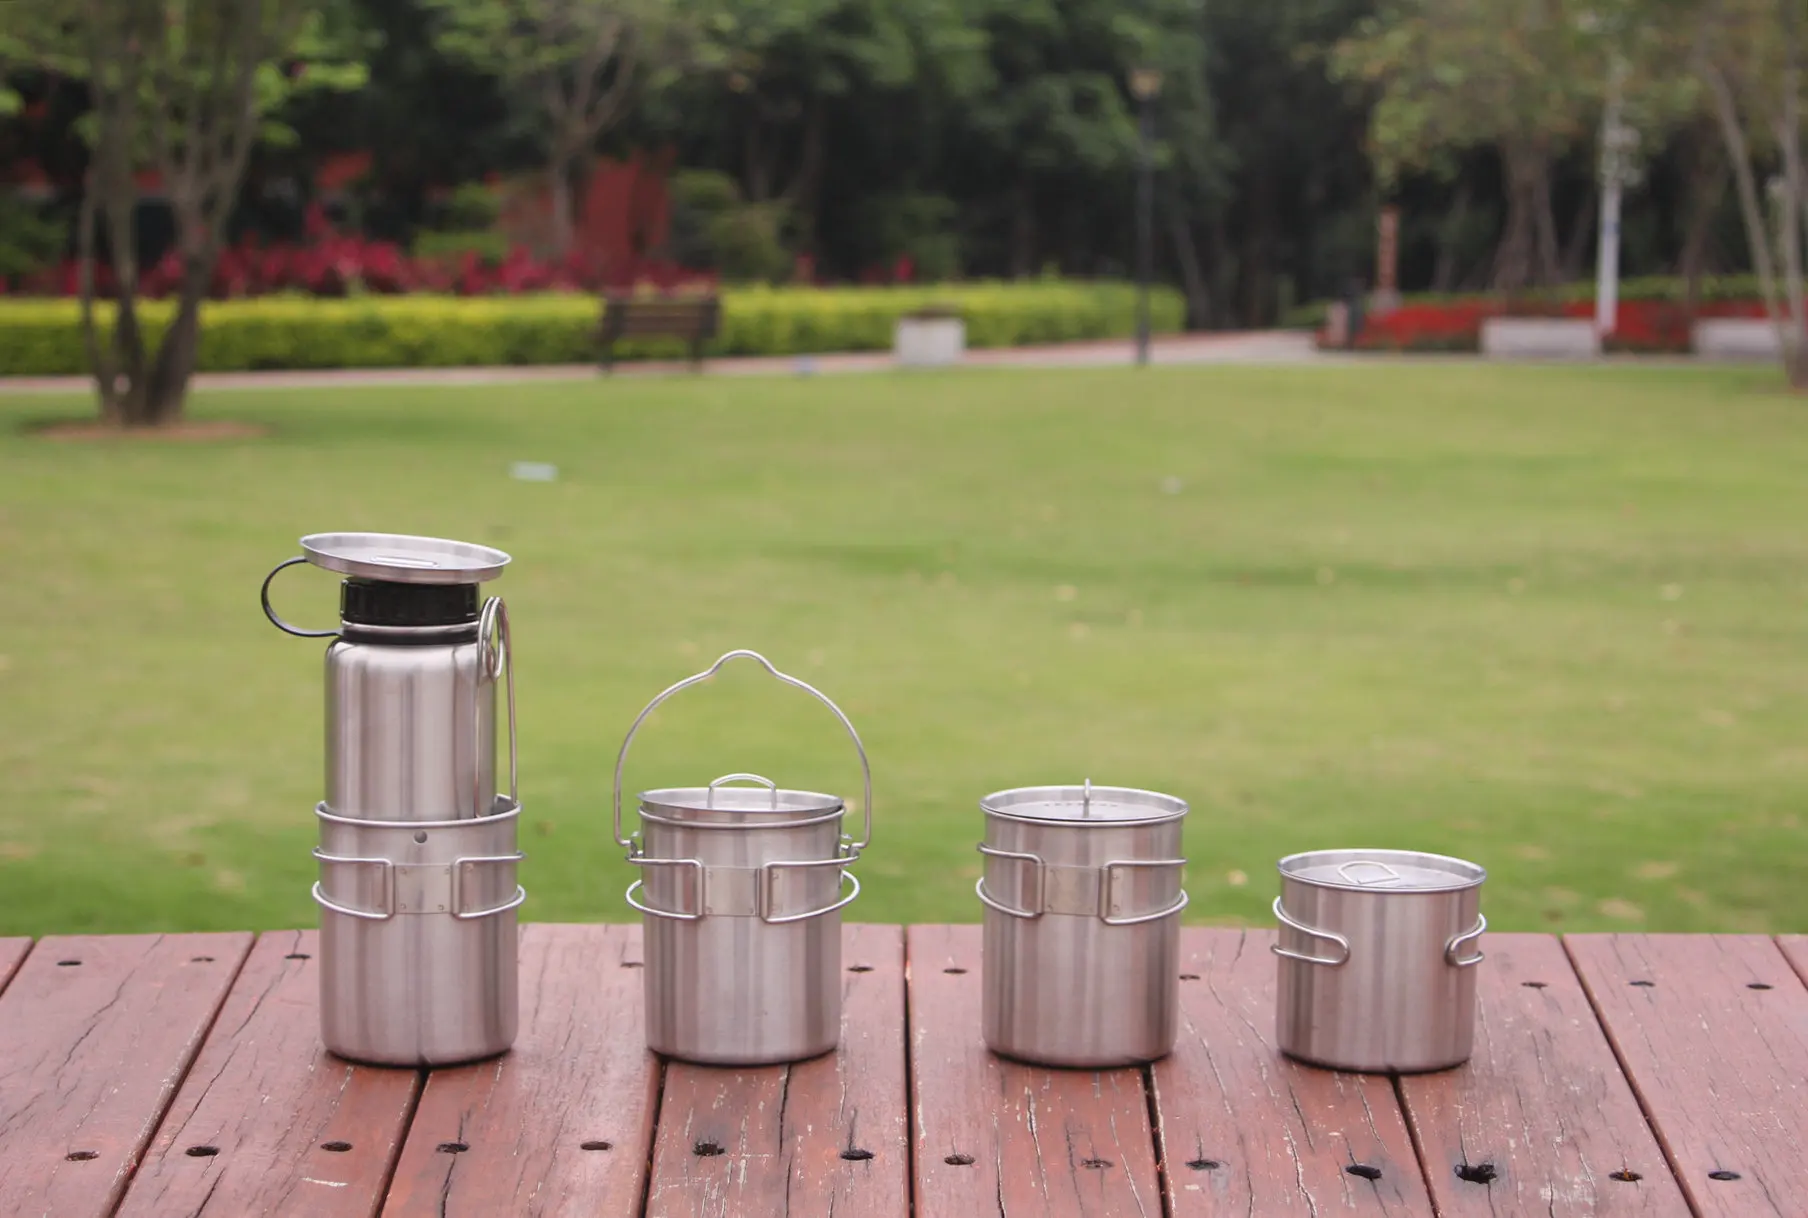 Srdwos Stainless Steel 18/8 Camping Cup Pot With Foldable Handles ...